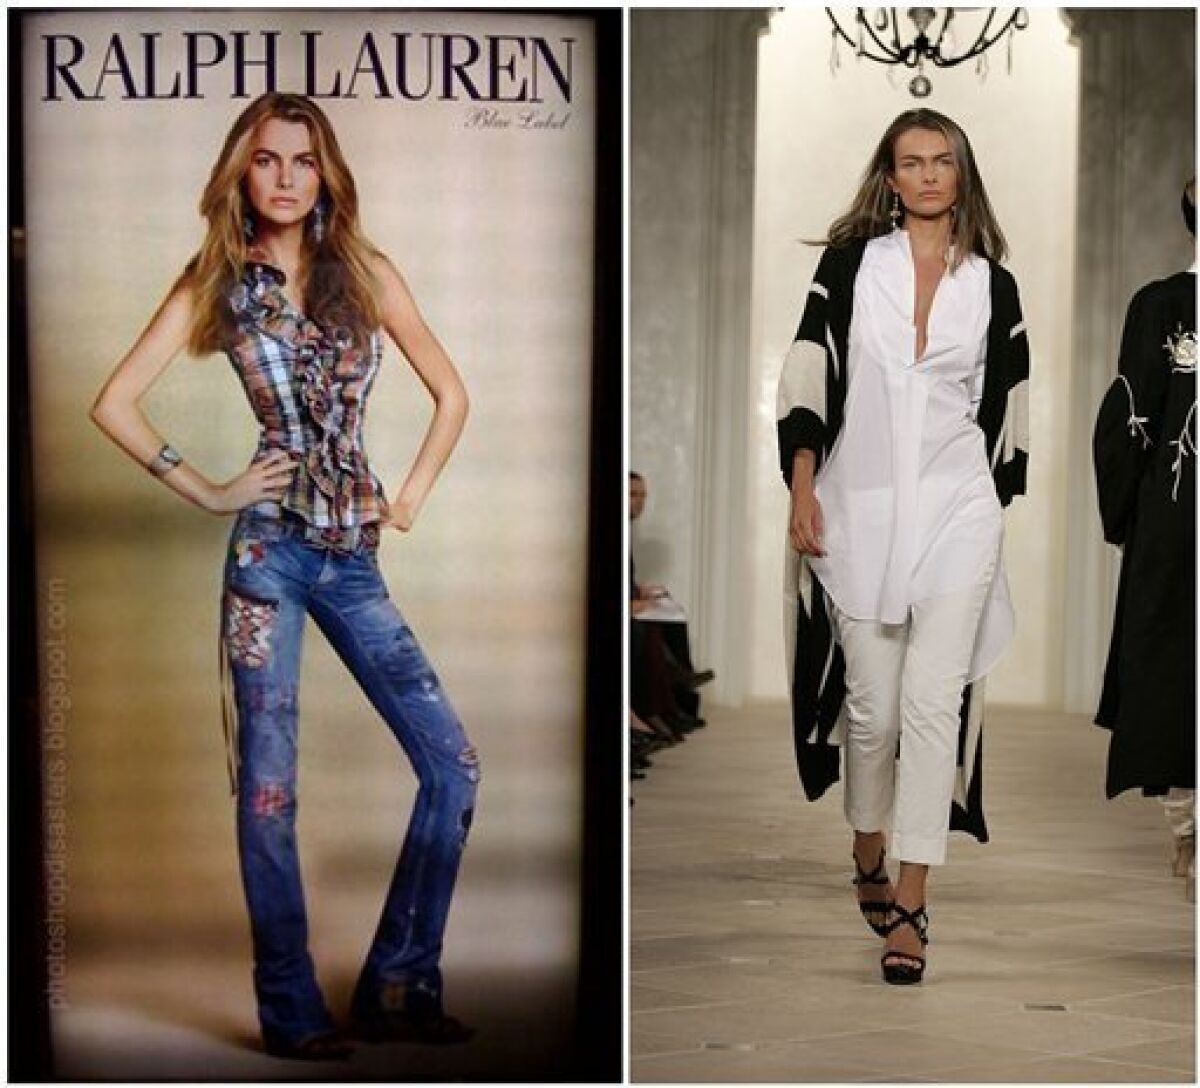 Model in altered Ralph Lauren ad speaks out - The San Diego Union-Tribune